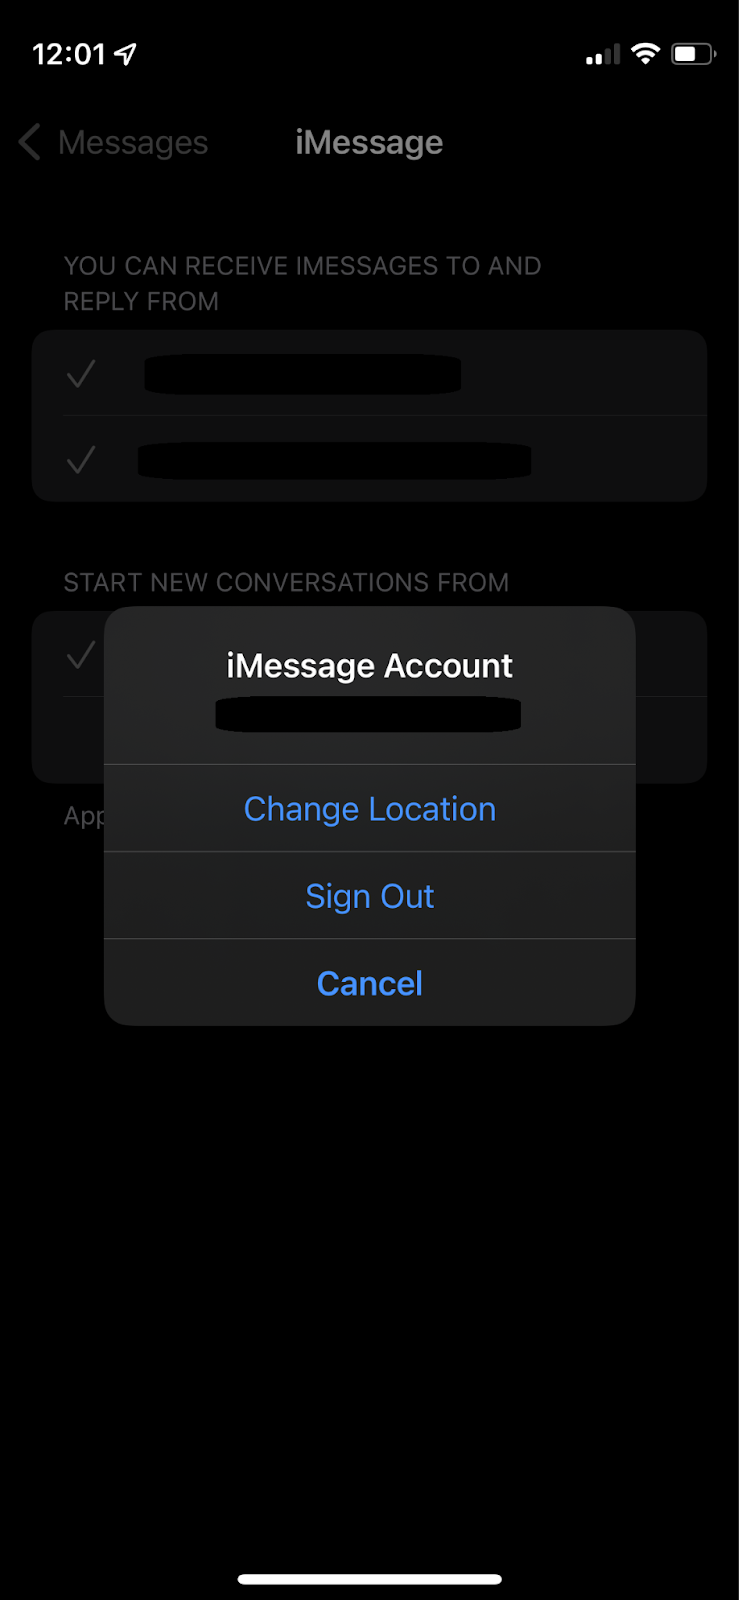 sign out and sign in again in Apple ID